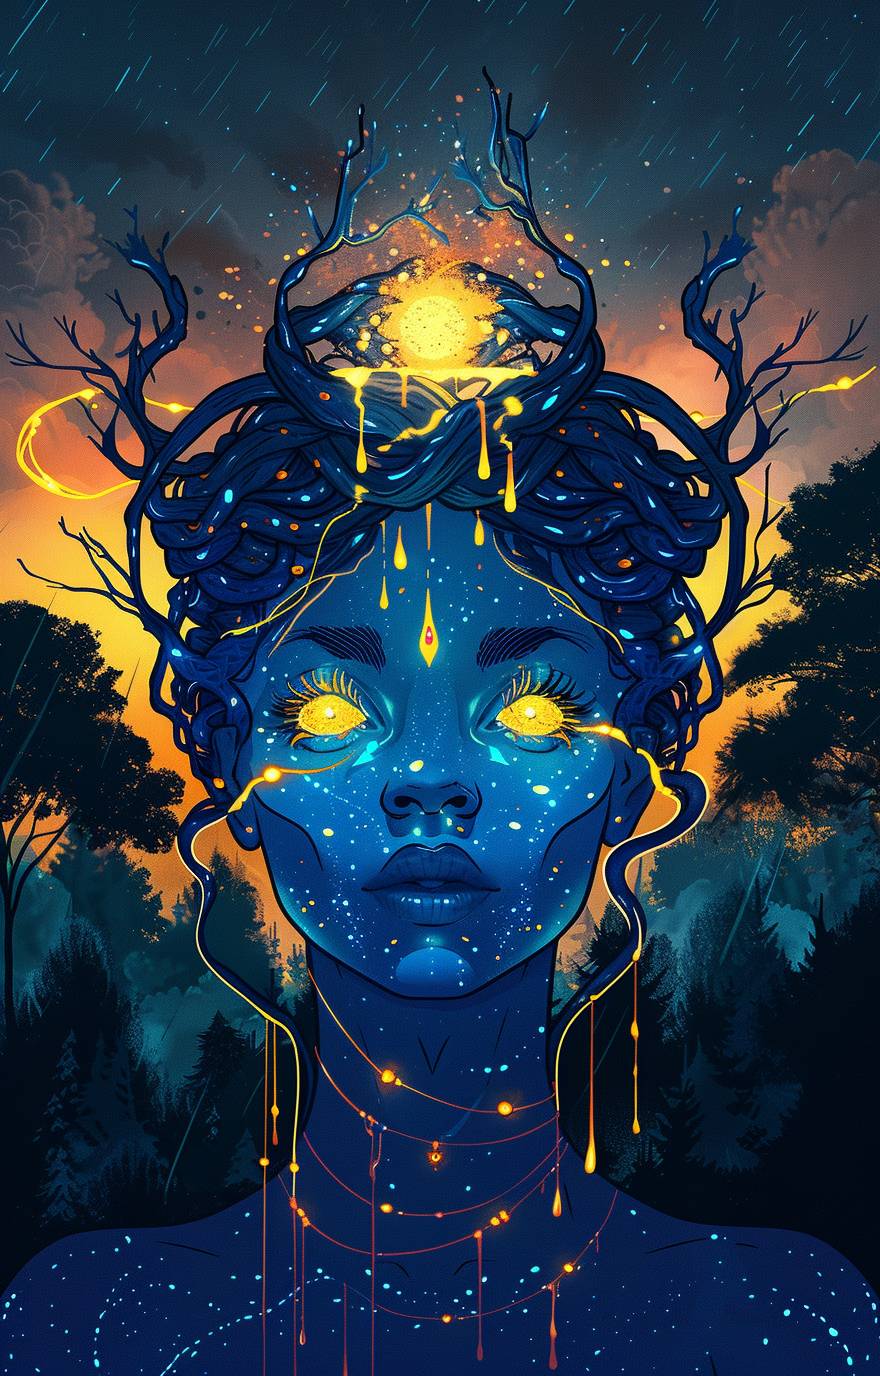 A blue-skinned alien woman with glowing eyes and an elaborate crown of intertwined vines, standing in front of the sun on her head. She has golden raindrops dripping from each hair strand onto one side of her face. In the background is a dark forest at night, with trees silhouetted against stars. The sky glows orange as if it's sunrise or sunset. A mystical atmosphere surrounds her in the style of fantasy anime